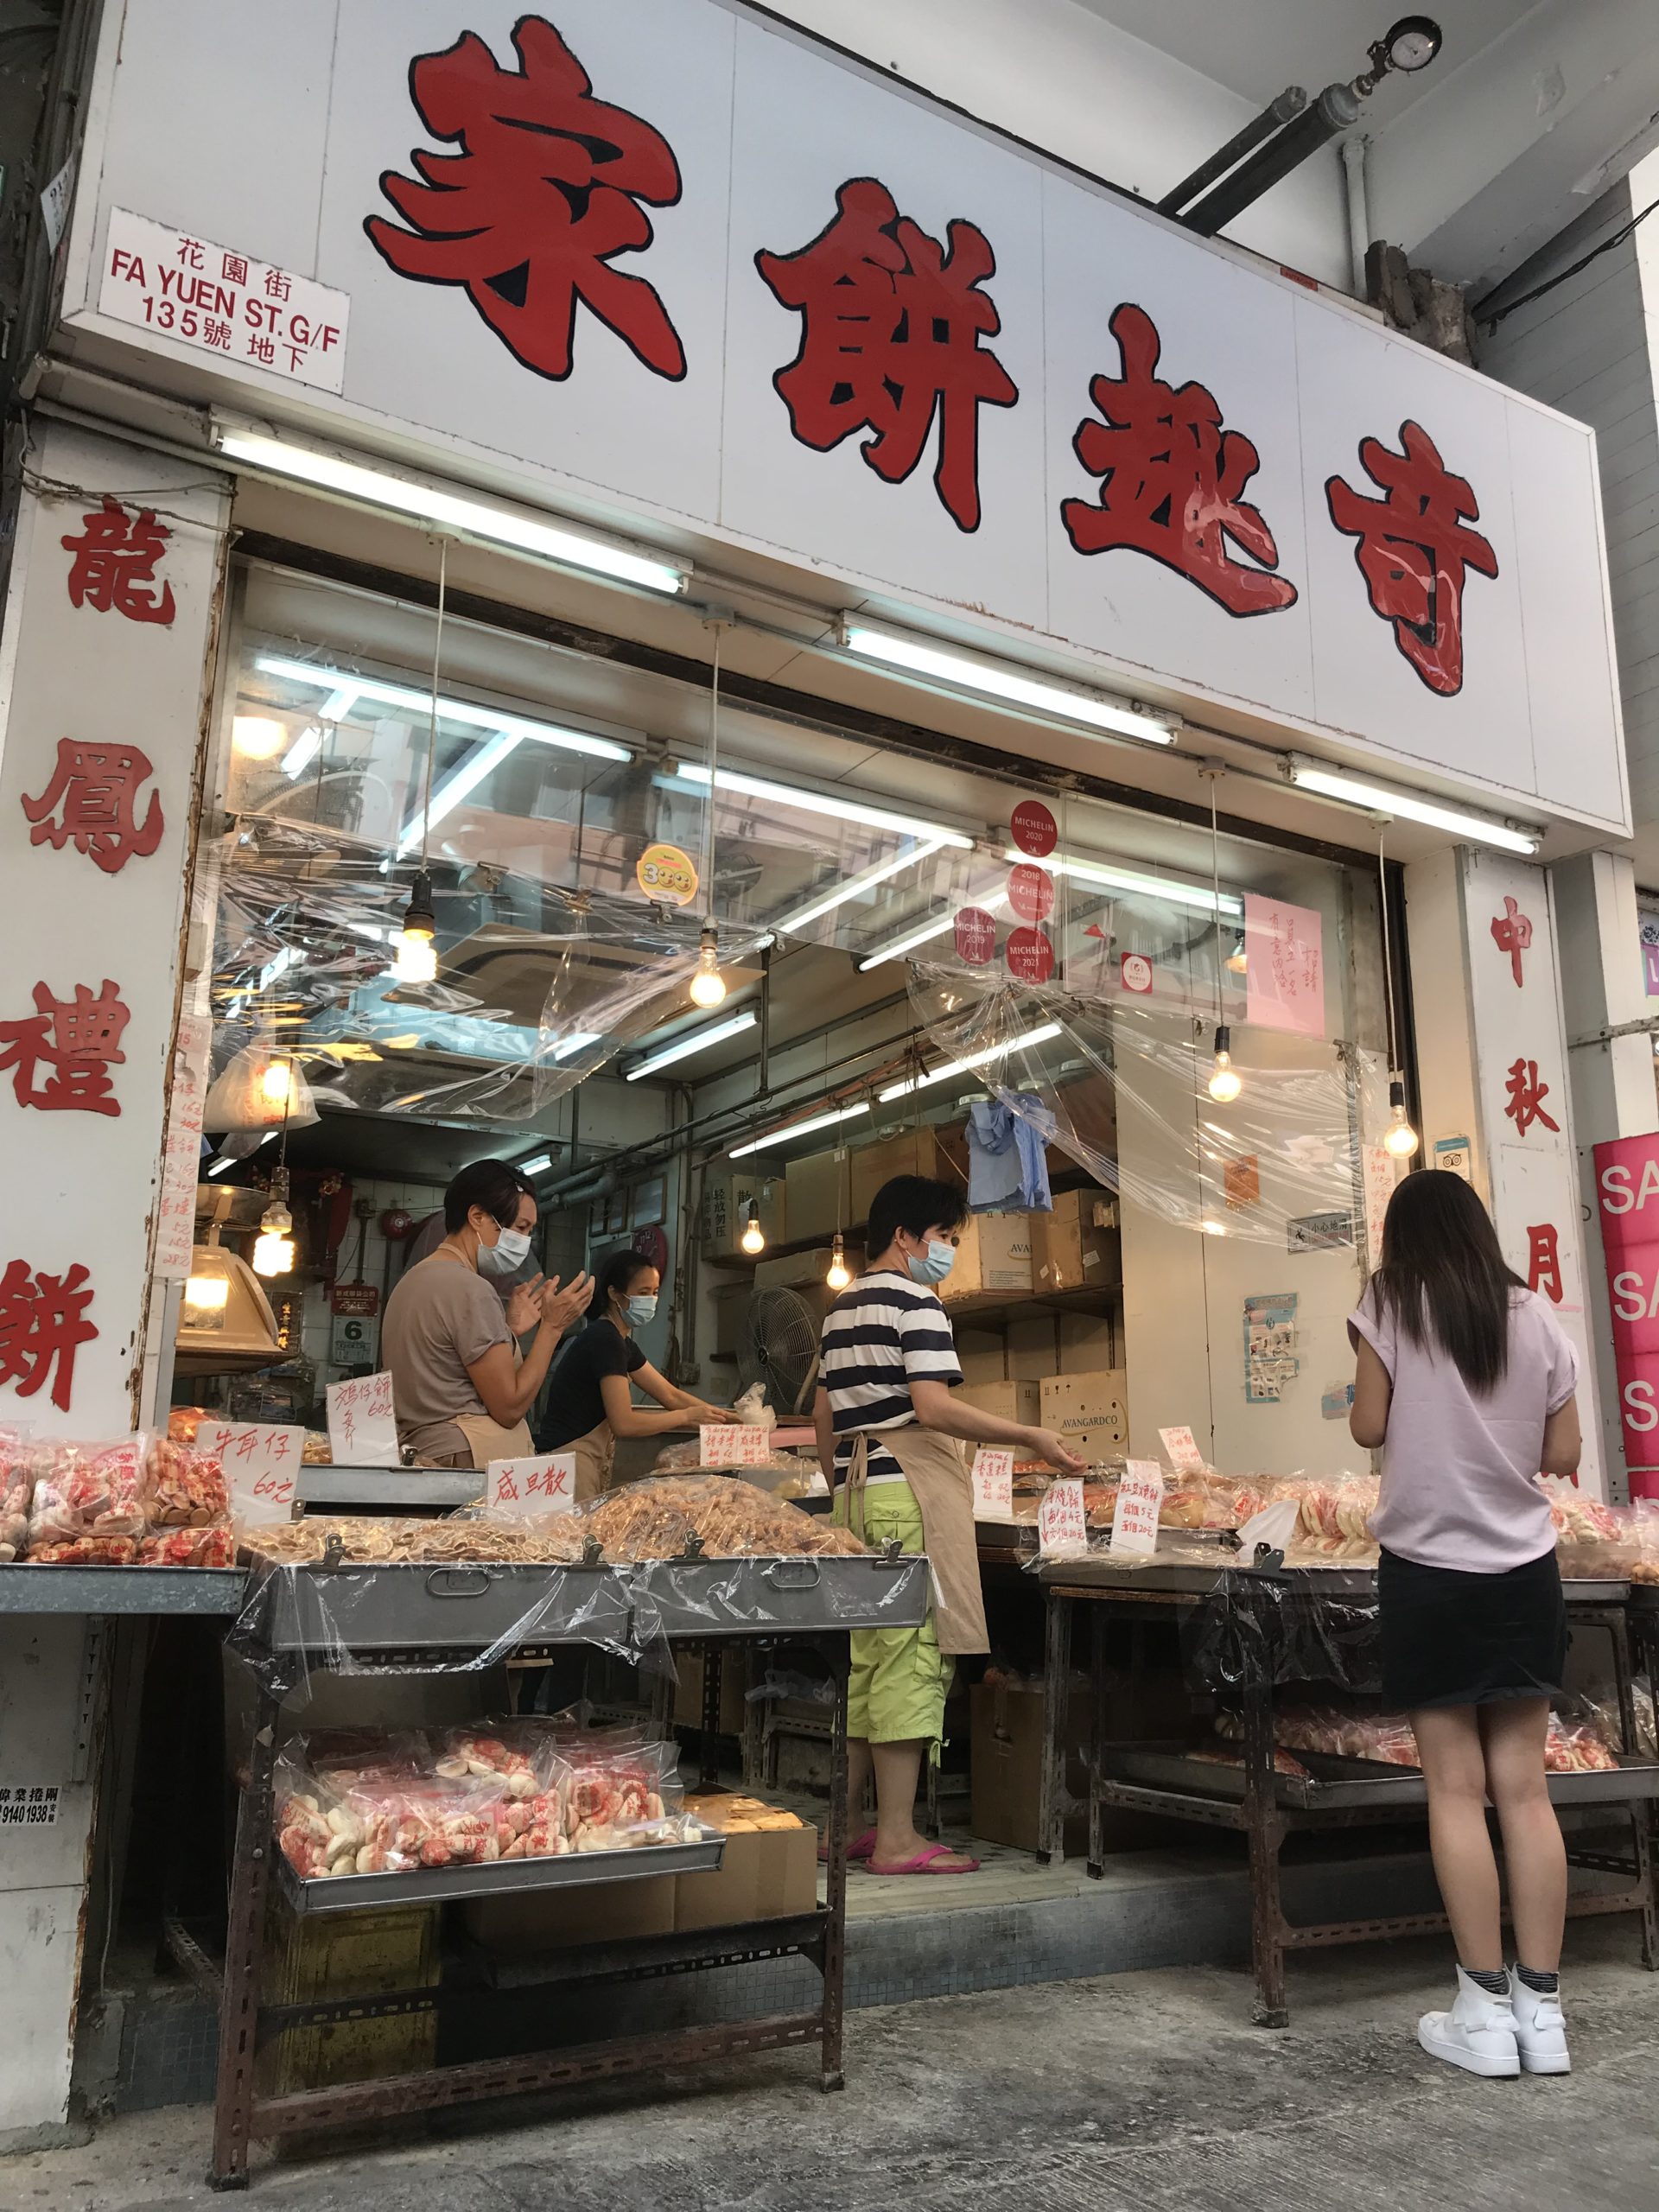 The shop front of Kee Tsui Cake Shop